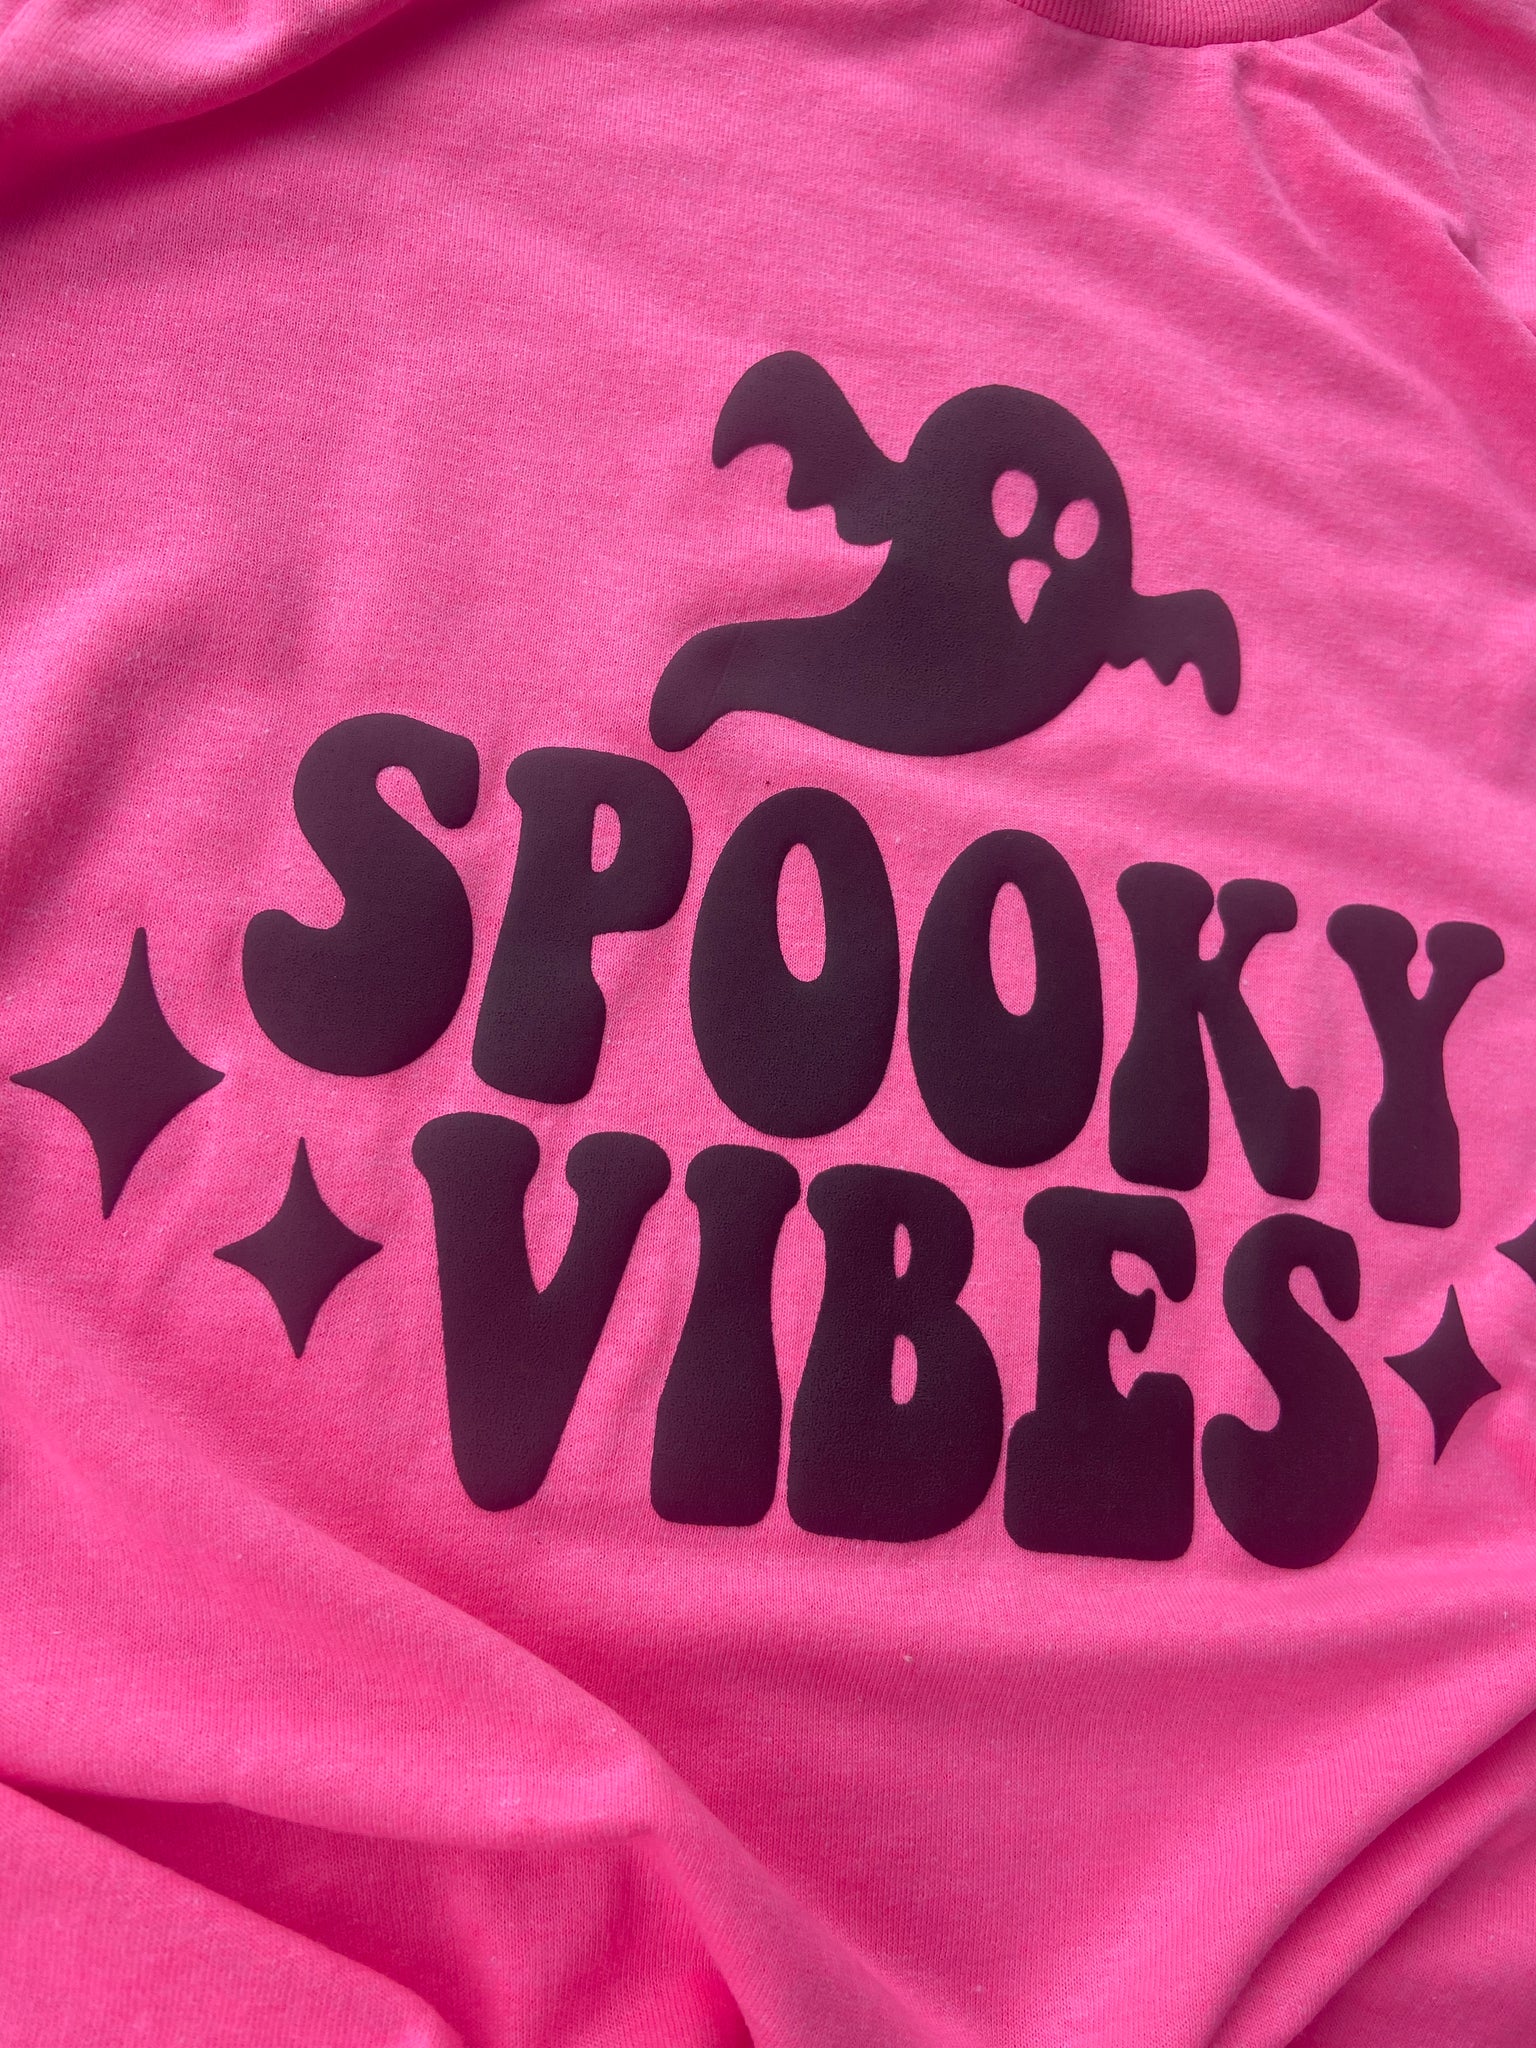 Spooky vibes hot pink puff tee